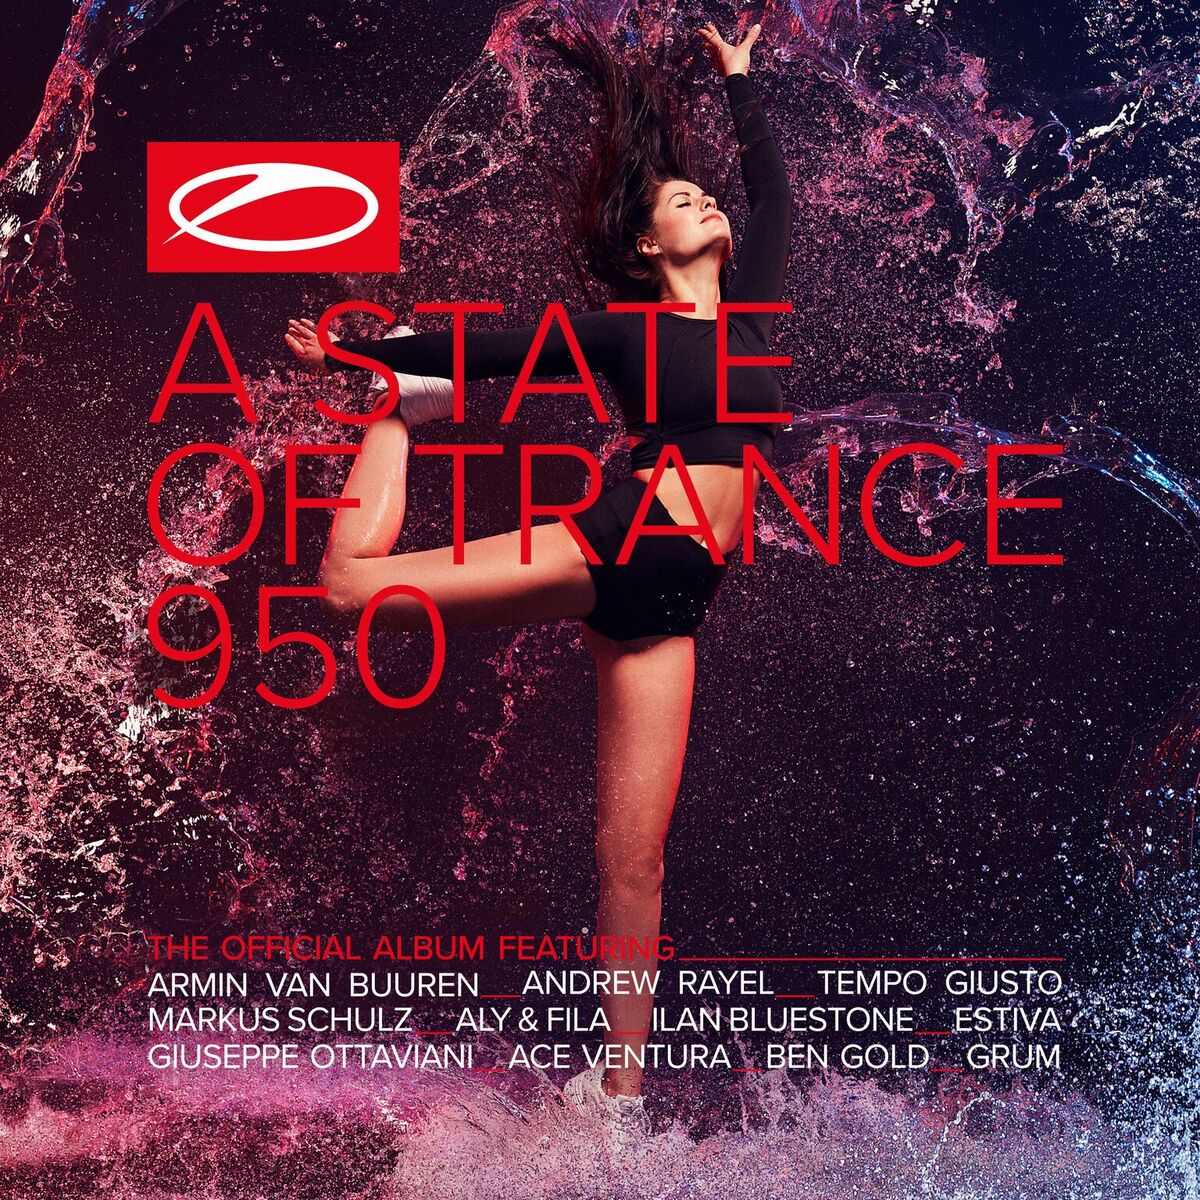 Various Artists presents A State Of Trance 950 mixed by Armin van Buuren on Armada Music